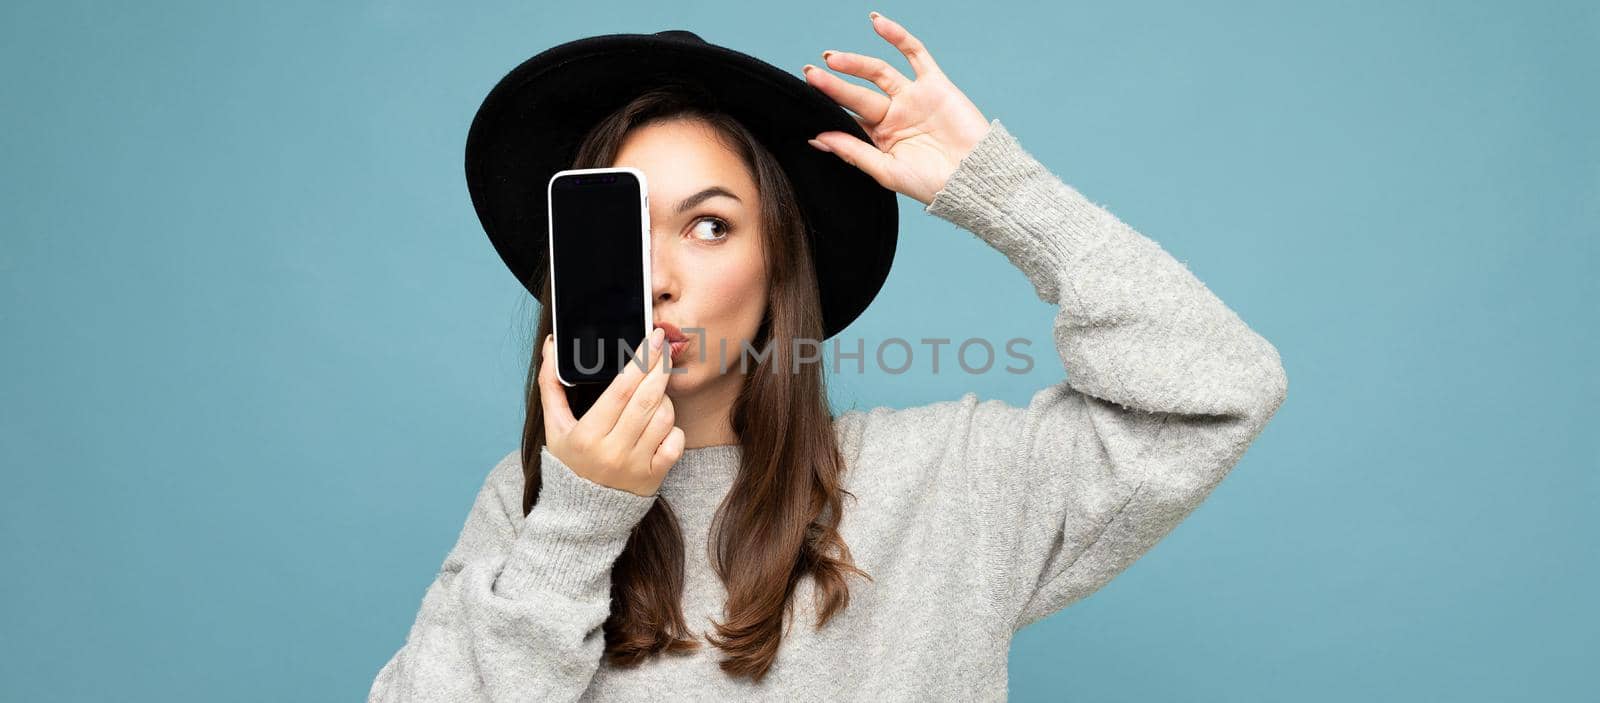 panoramic Photo of Beautiful amazed positive woman wearing black hat and grey sweater holding mobilephone showing smartphone isolated on background looking to the side.Mock up, cutout, free space. copy space